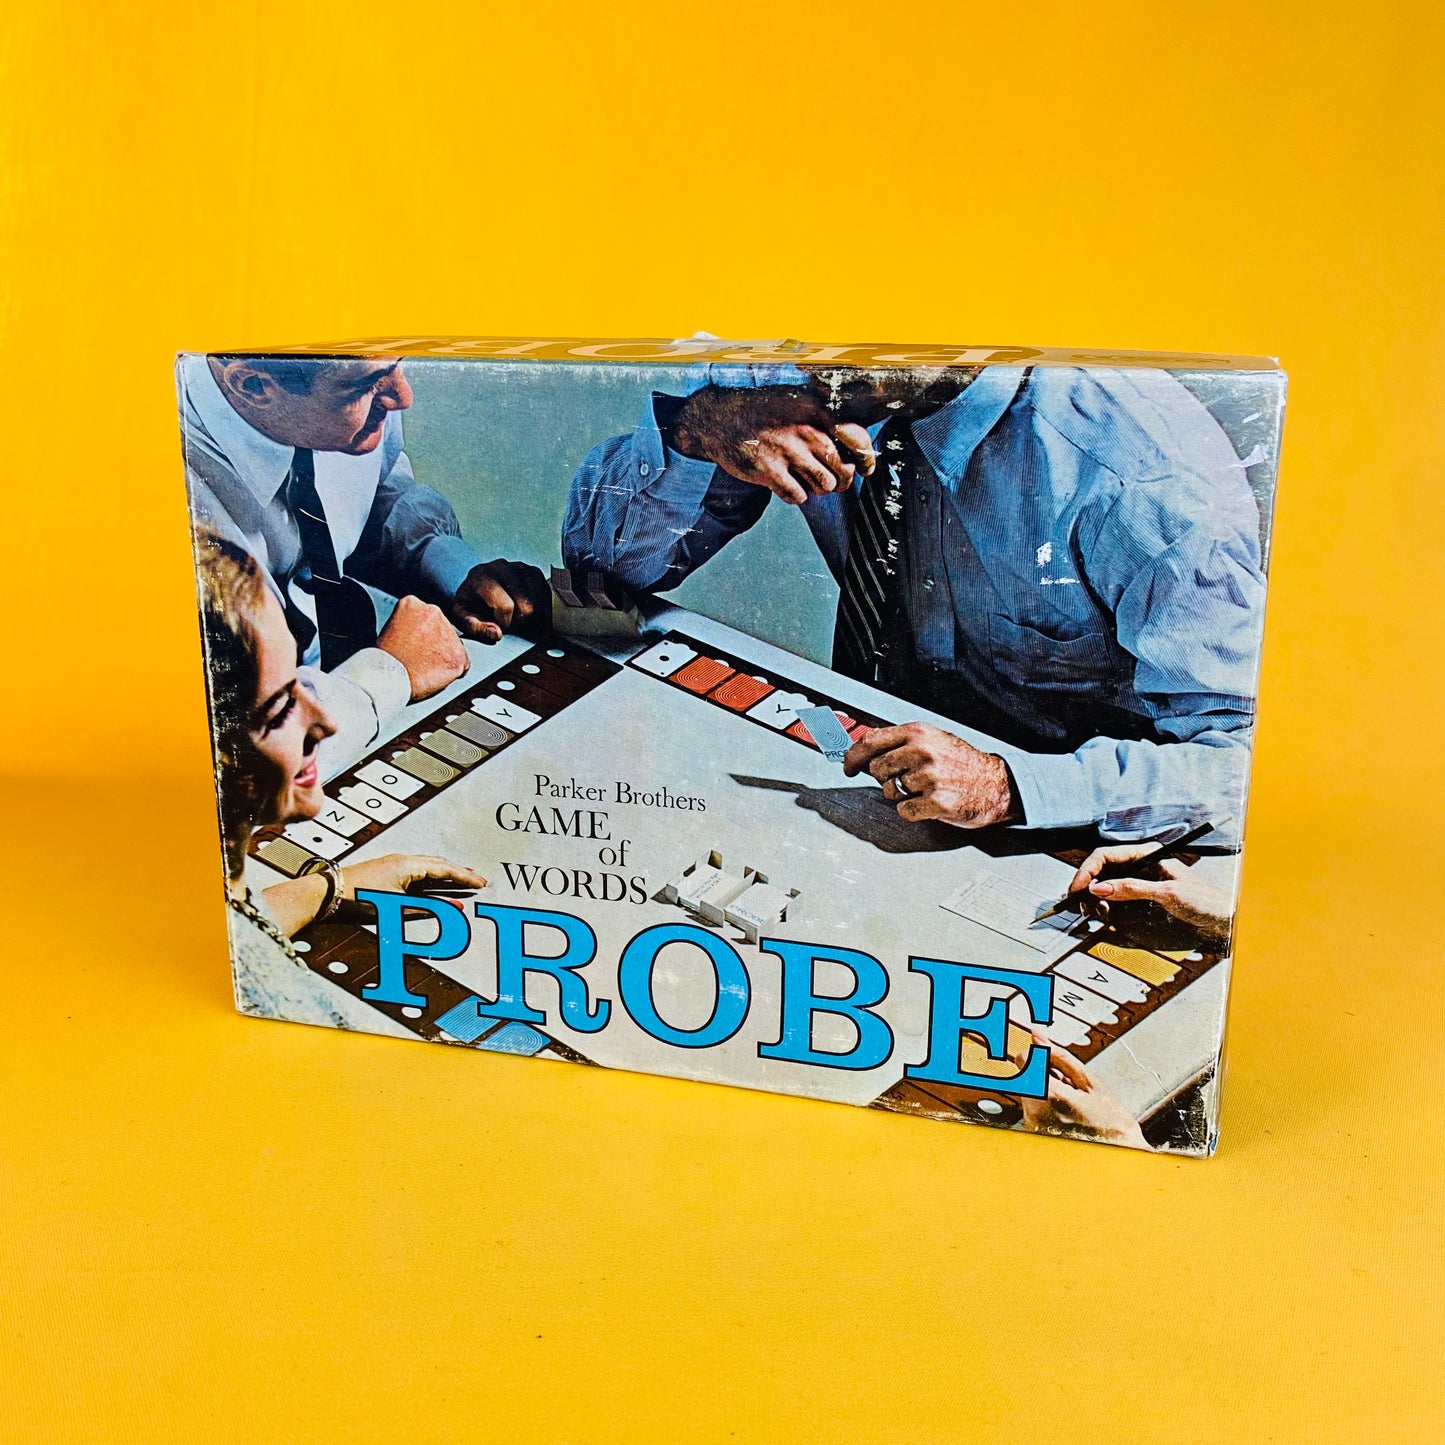 probe board game by parker brothers